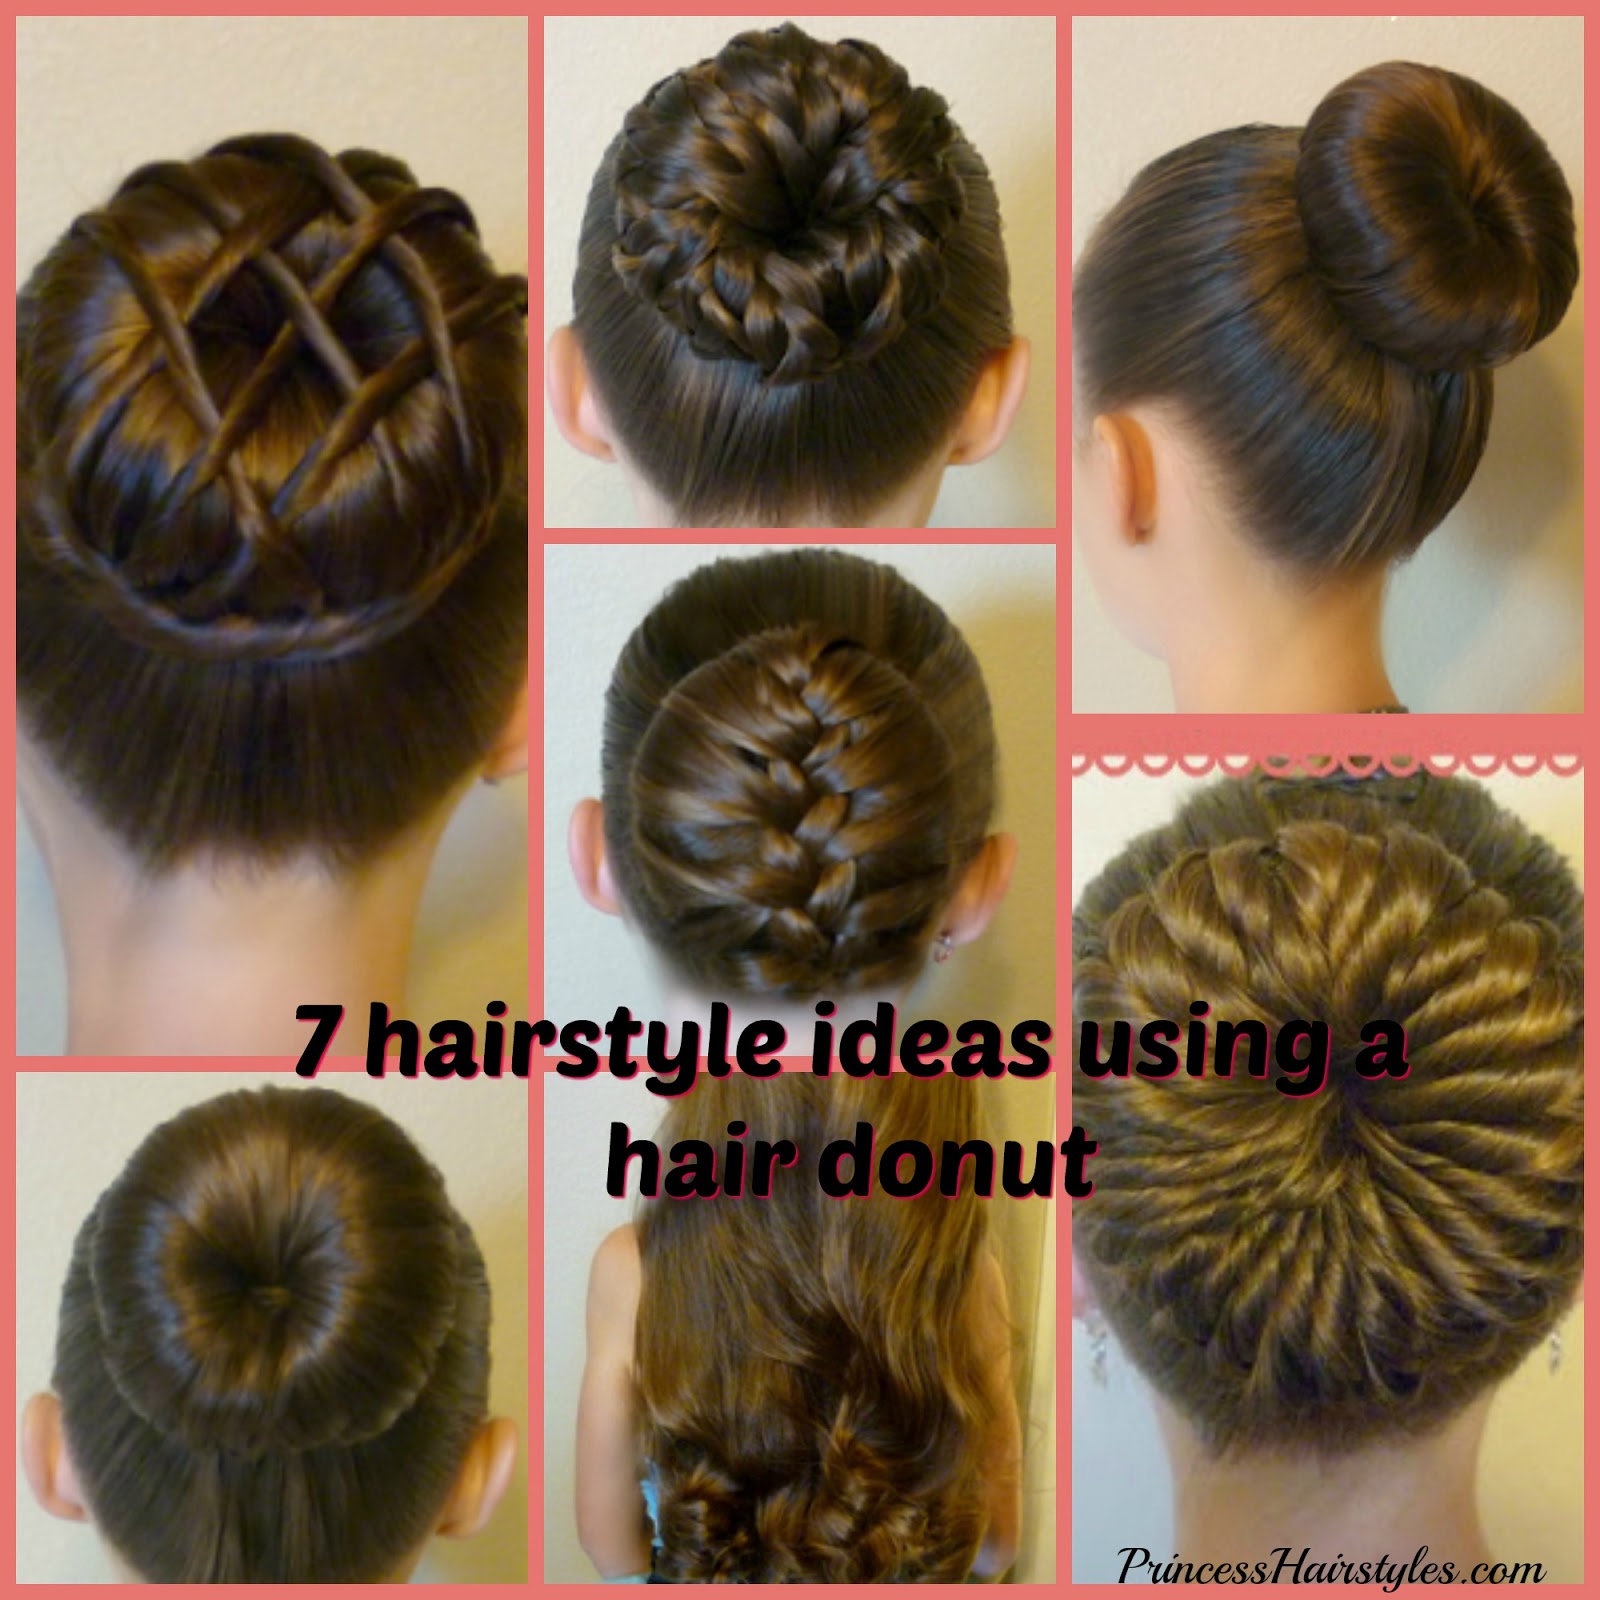 How To Do The Low Bun Hairstyle – A Step-By-Step Tutorial